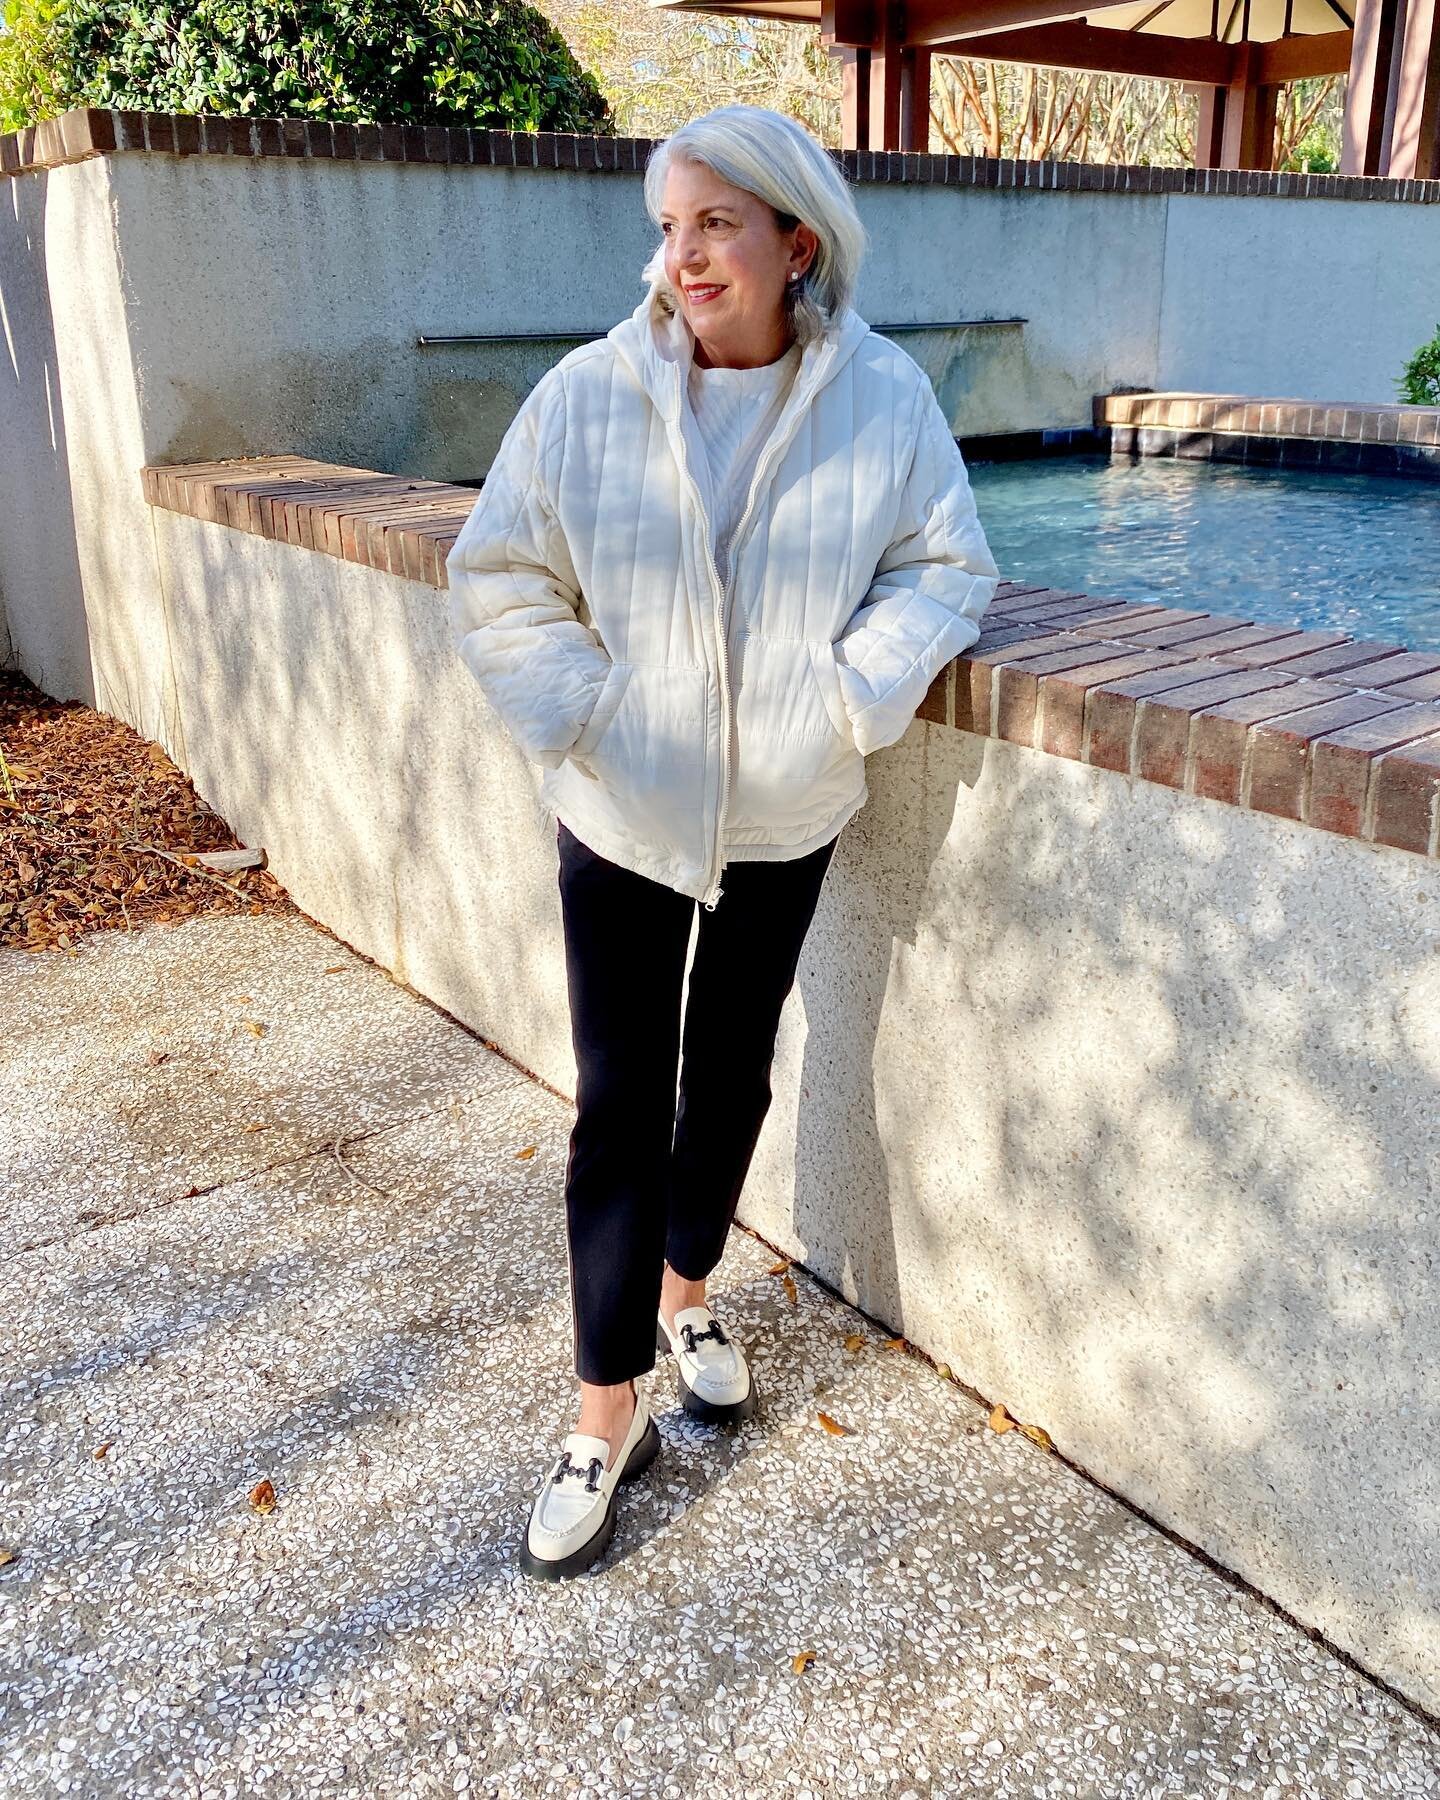 Outerwear is one of my favorite ways to style a complete look from @Target #ad.&nbsp; They have so many &ldquo;cool&rdquo; choices this season in every color palette and fabric.&nbsp; This chic, Travel Puffer has quickly become my favorite jacket thi